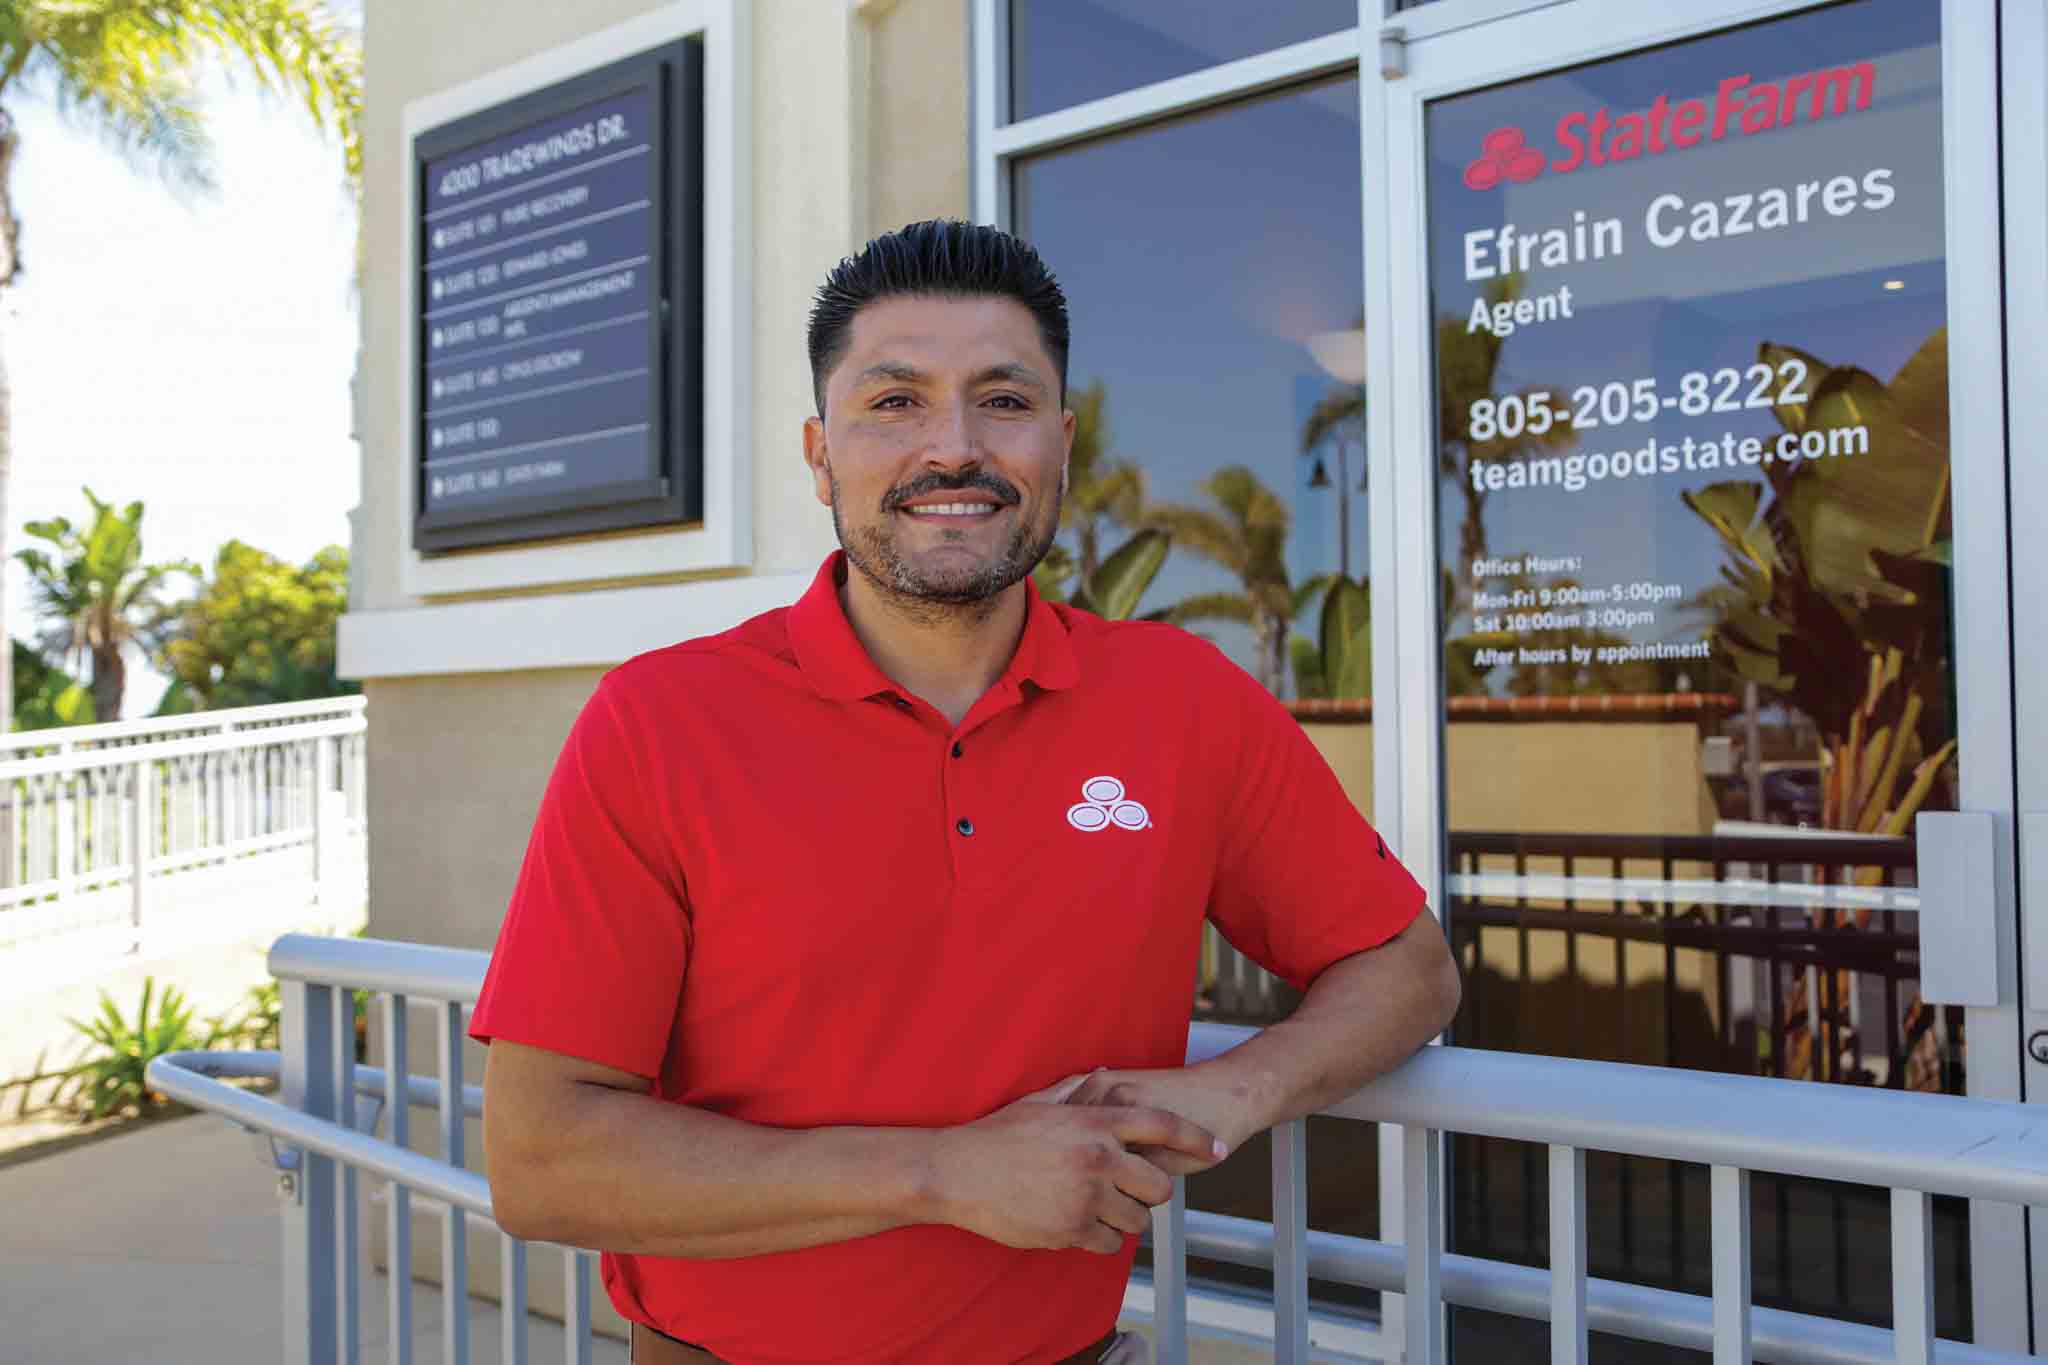 Efrain Cazares takes pride in helping customers in their most stressful time of need.